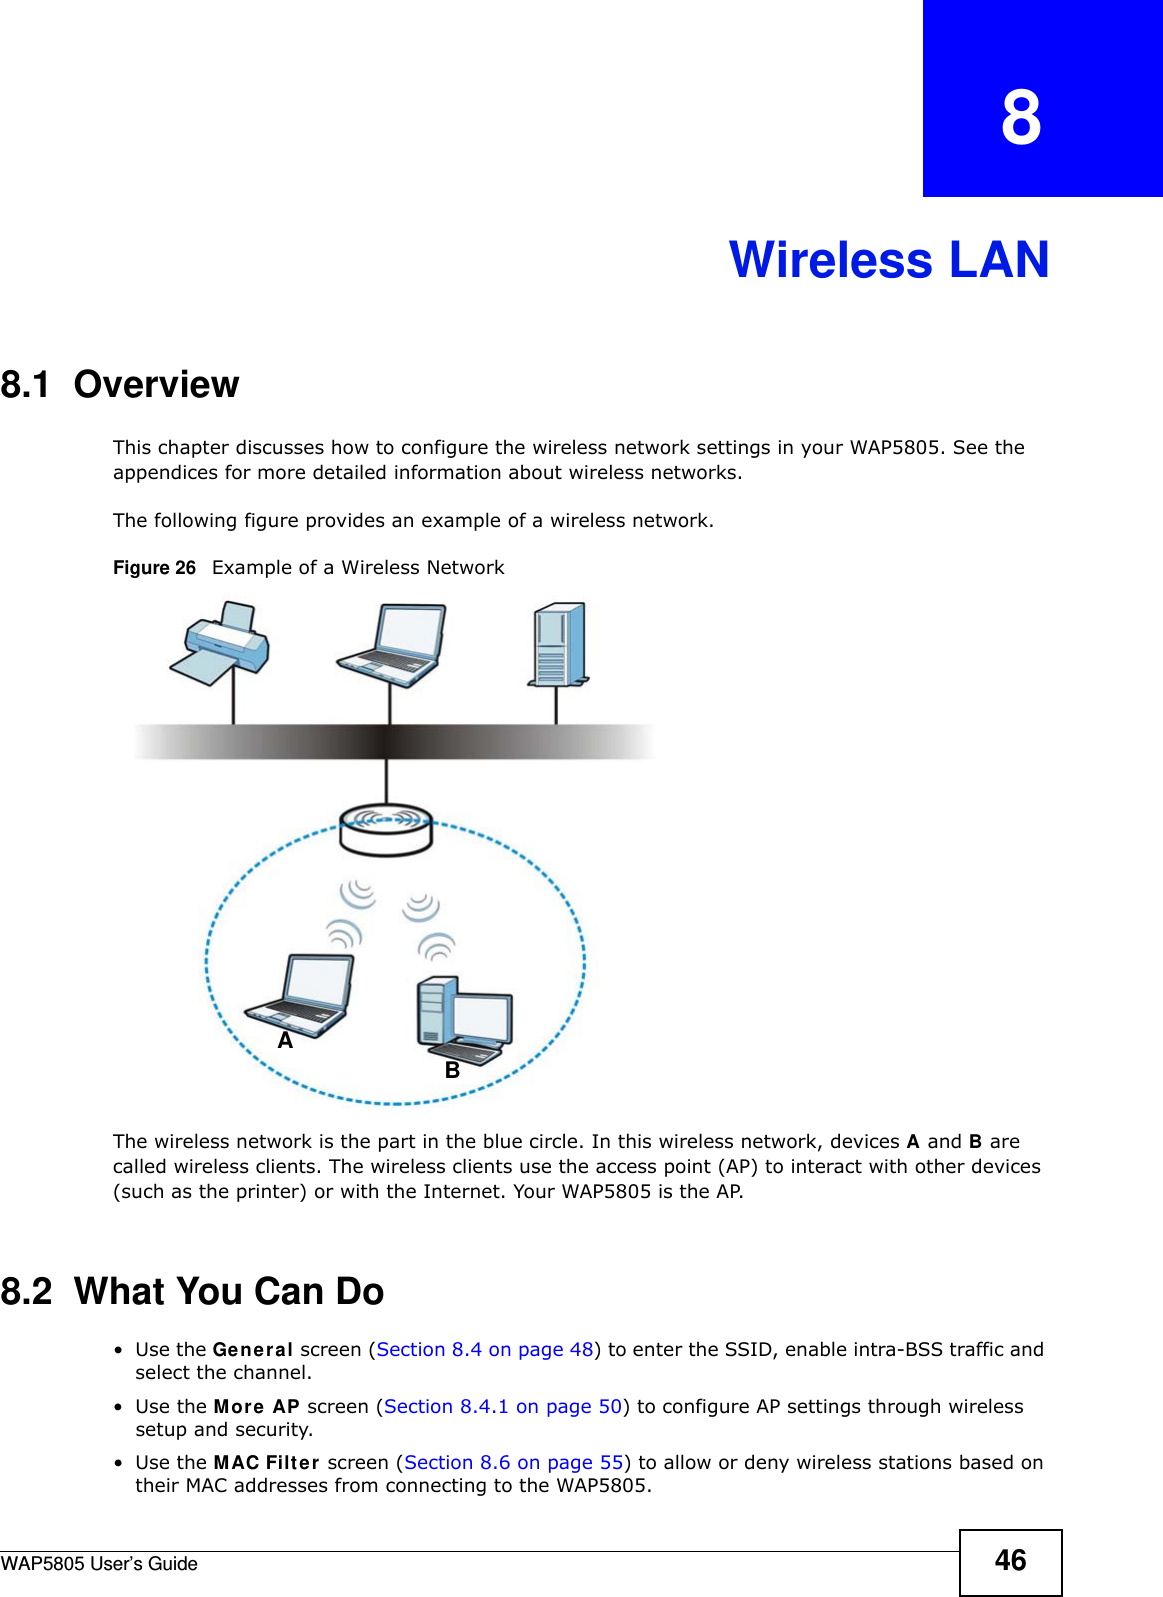 WAP5805 User’s Guide 46CHAPTER   8Wireless LAN8.1  OverviewThis chapter discusses how to configure the wireless network settings in your WAP5805. See the appendices for more detailed information about wireless networks.The following figure provides an example of a wireless network.Figure 26   Example of a Wireless NetworkThe wireless network is the part in the blue circle. In this wireless network, devices A and B are called wireless clients. The wireless clients use the access point (AP) to interact with other devices (such as the printer) or with the Internet. Your WAP5805 is the AP.8.2  What You Can Do•Use the General screen (Section 8.4 on page 48) to enter the SSID, enable intra-BSS traffic and select the channel.•Use the More AP screen (Section 8.4.1 on page 50) to configure AP settings through wireless setup and security.•Use the MAC Filter screen (Section 8.6 on page 55) to allow or deny wireless stations based on their MAC addresses from connecting to the WAP5805.AB